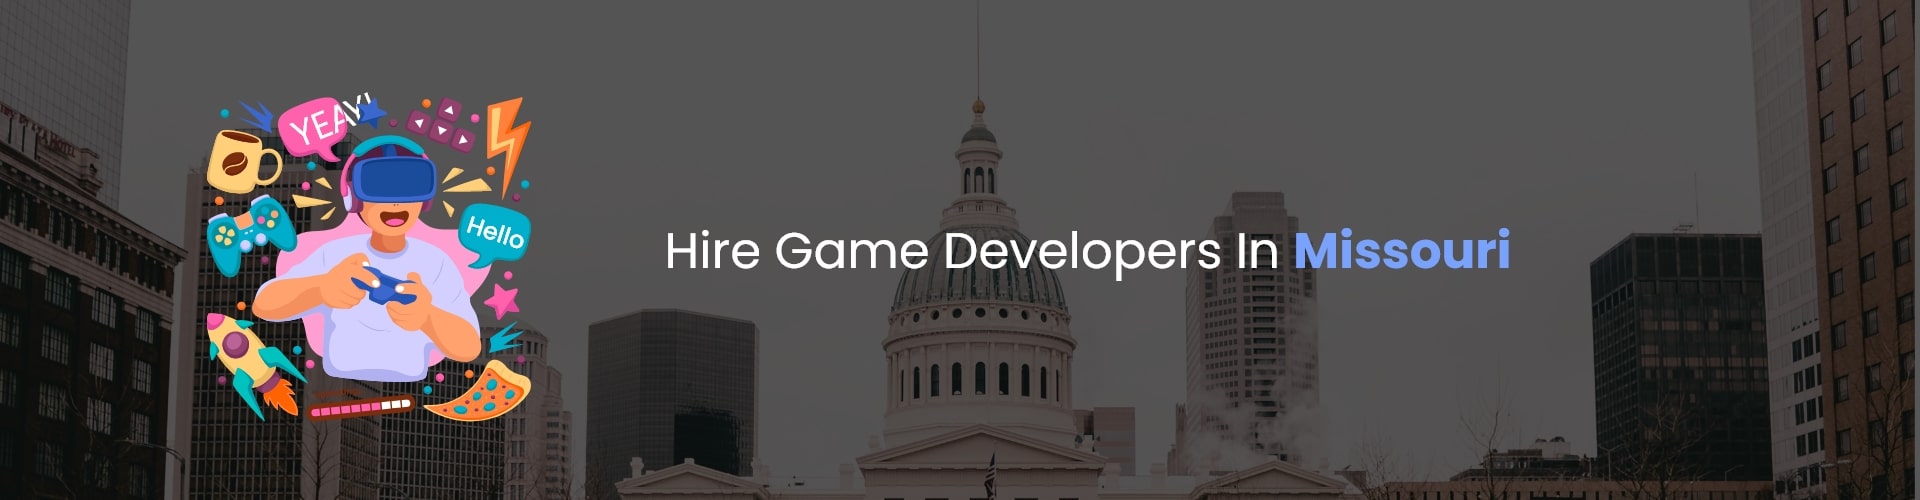 hire game developers in missouri